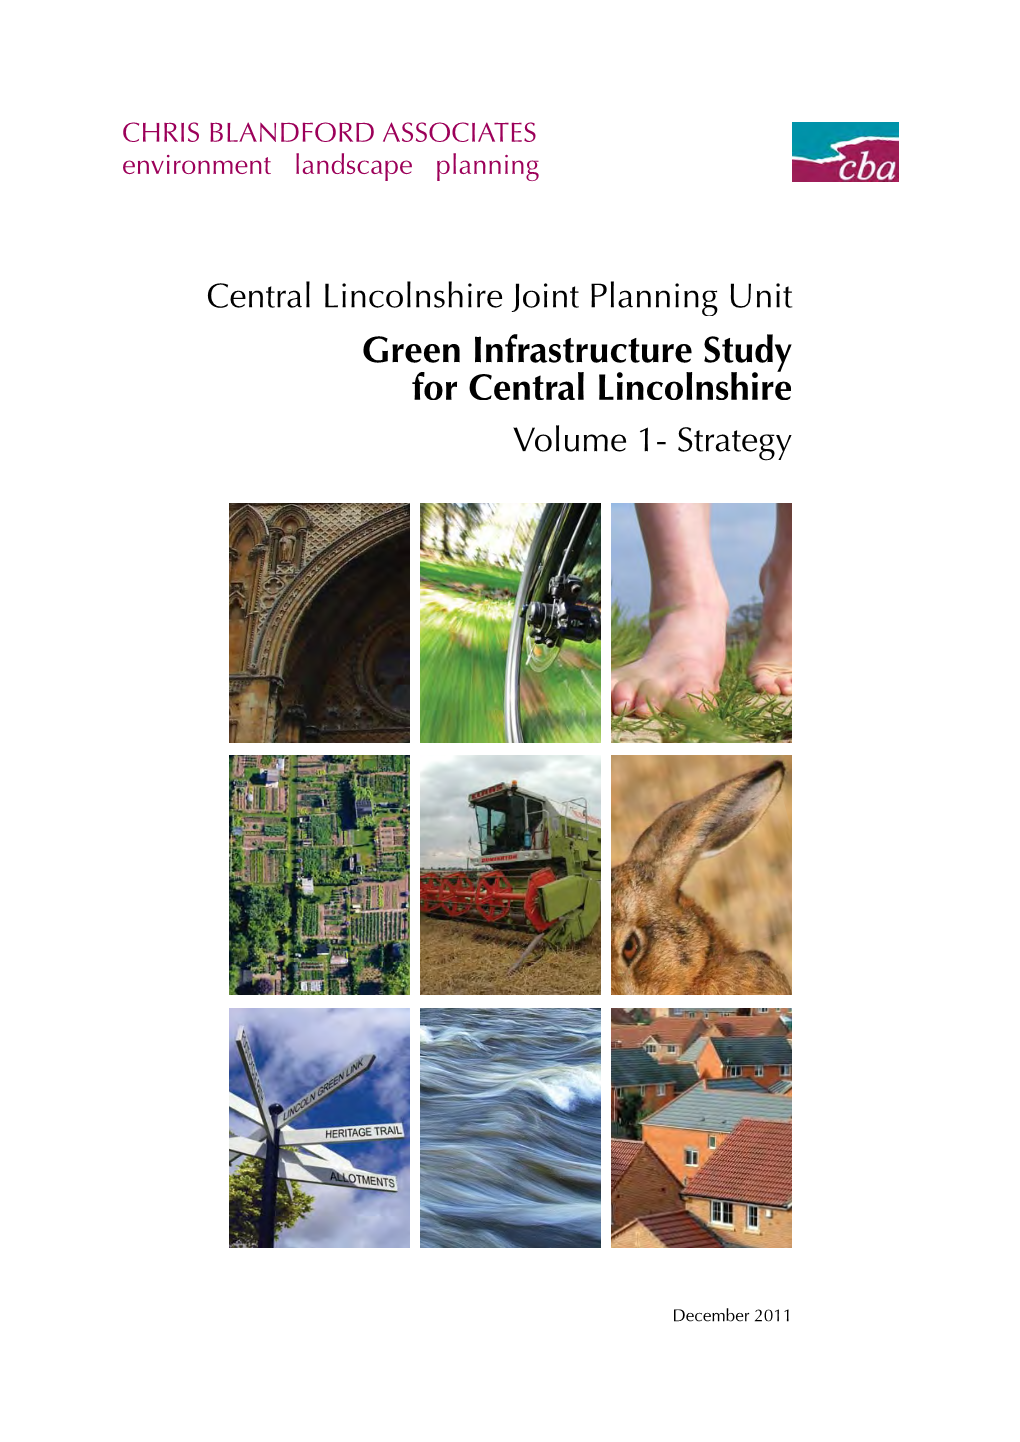 Green Infrastructure Study for Central Lincolnshire Volume 1- Strategy